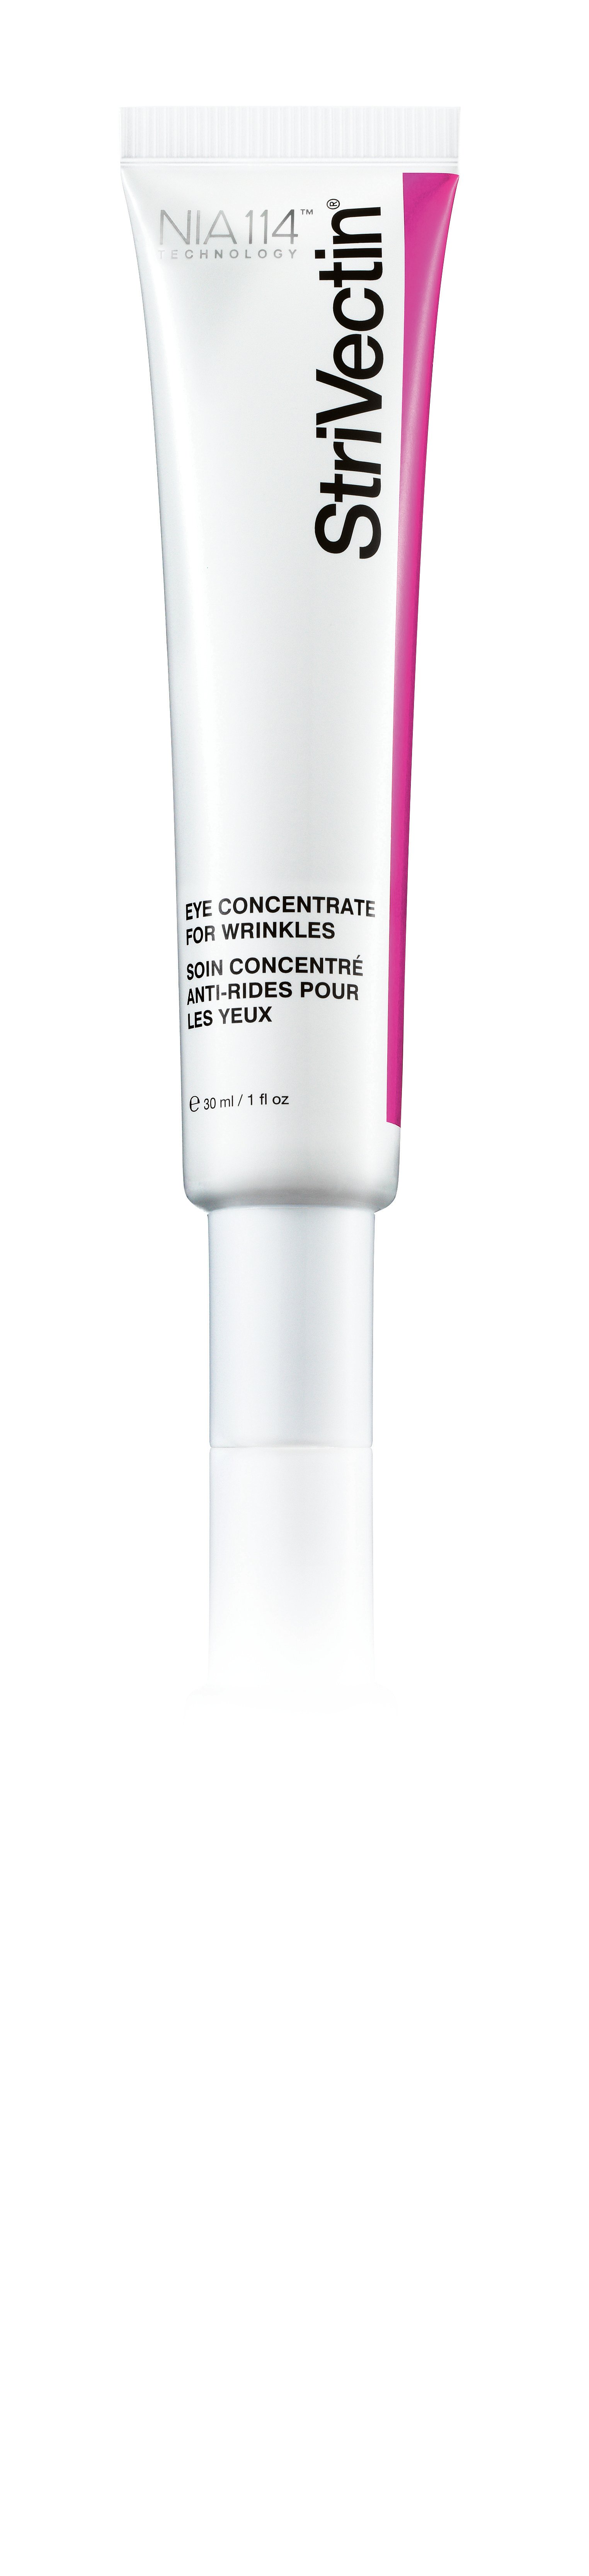 StriVectin Eye Concentrate for Wrinkles